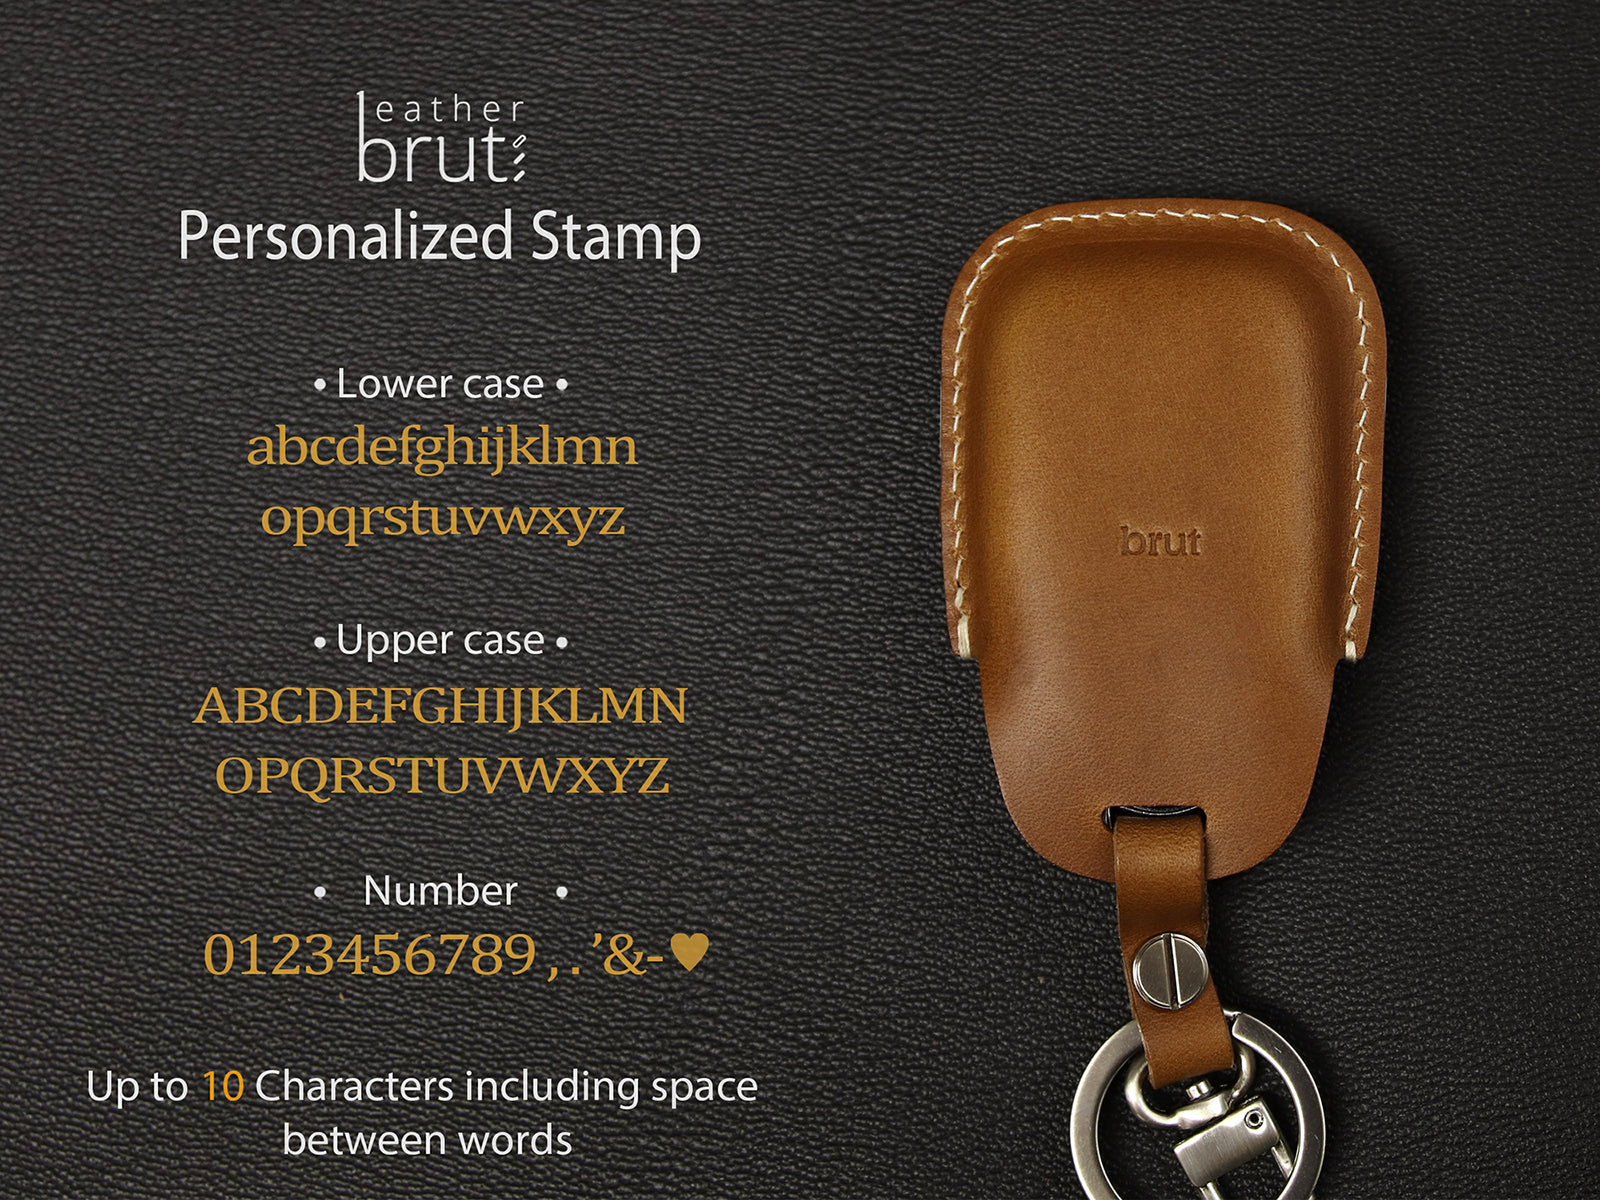 Cadillac Key Fob Covers Online – Leather Brut